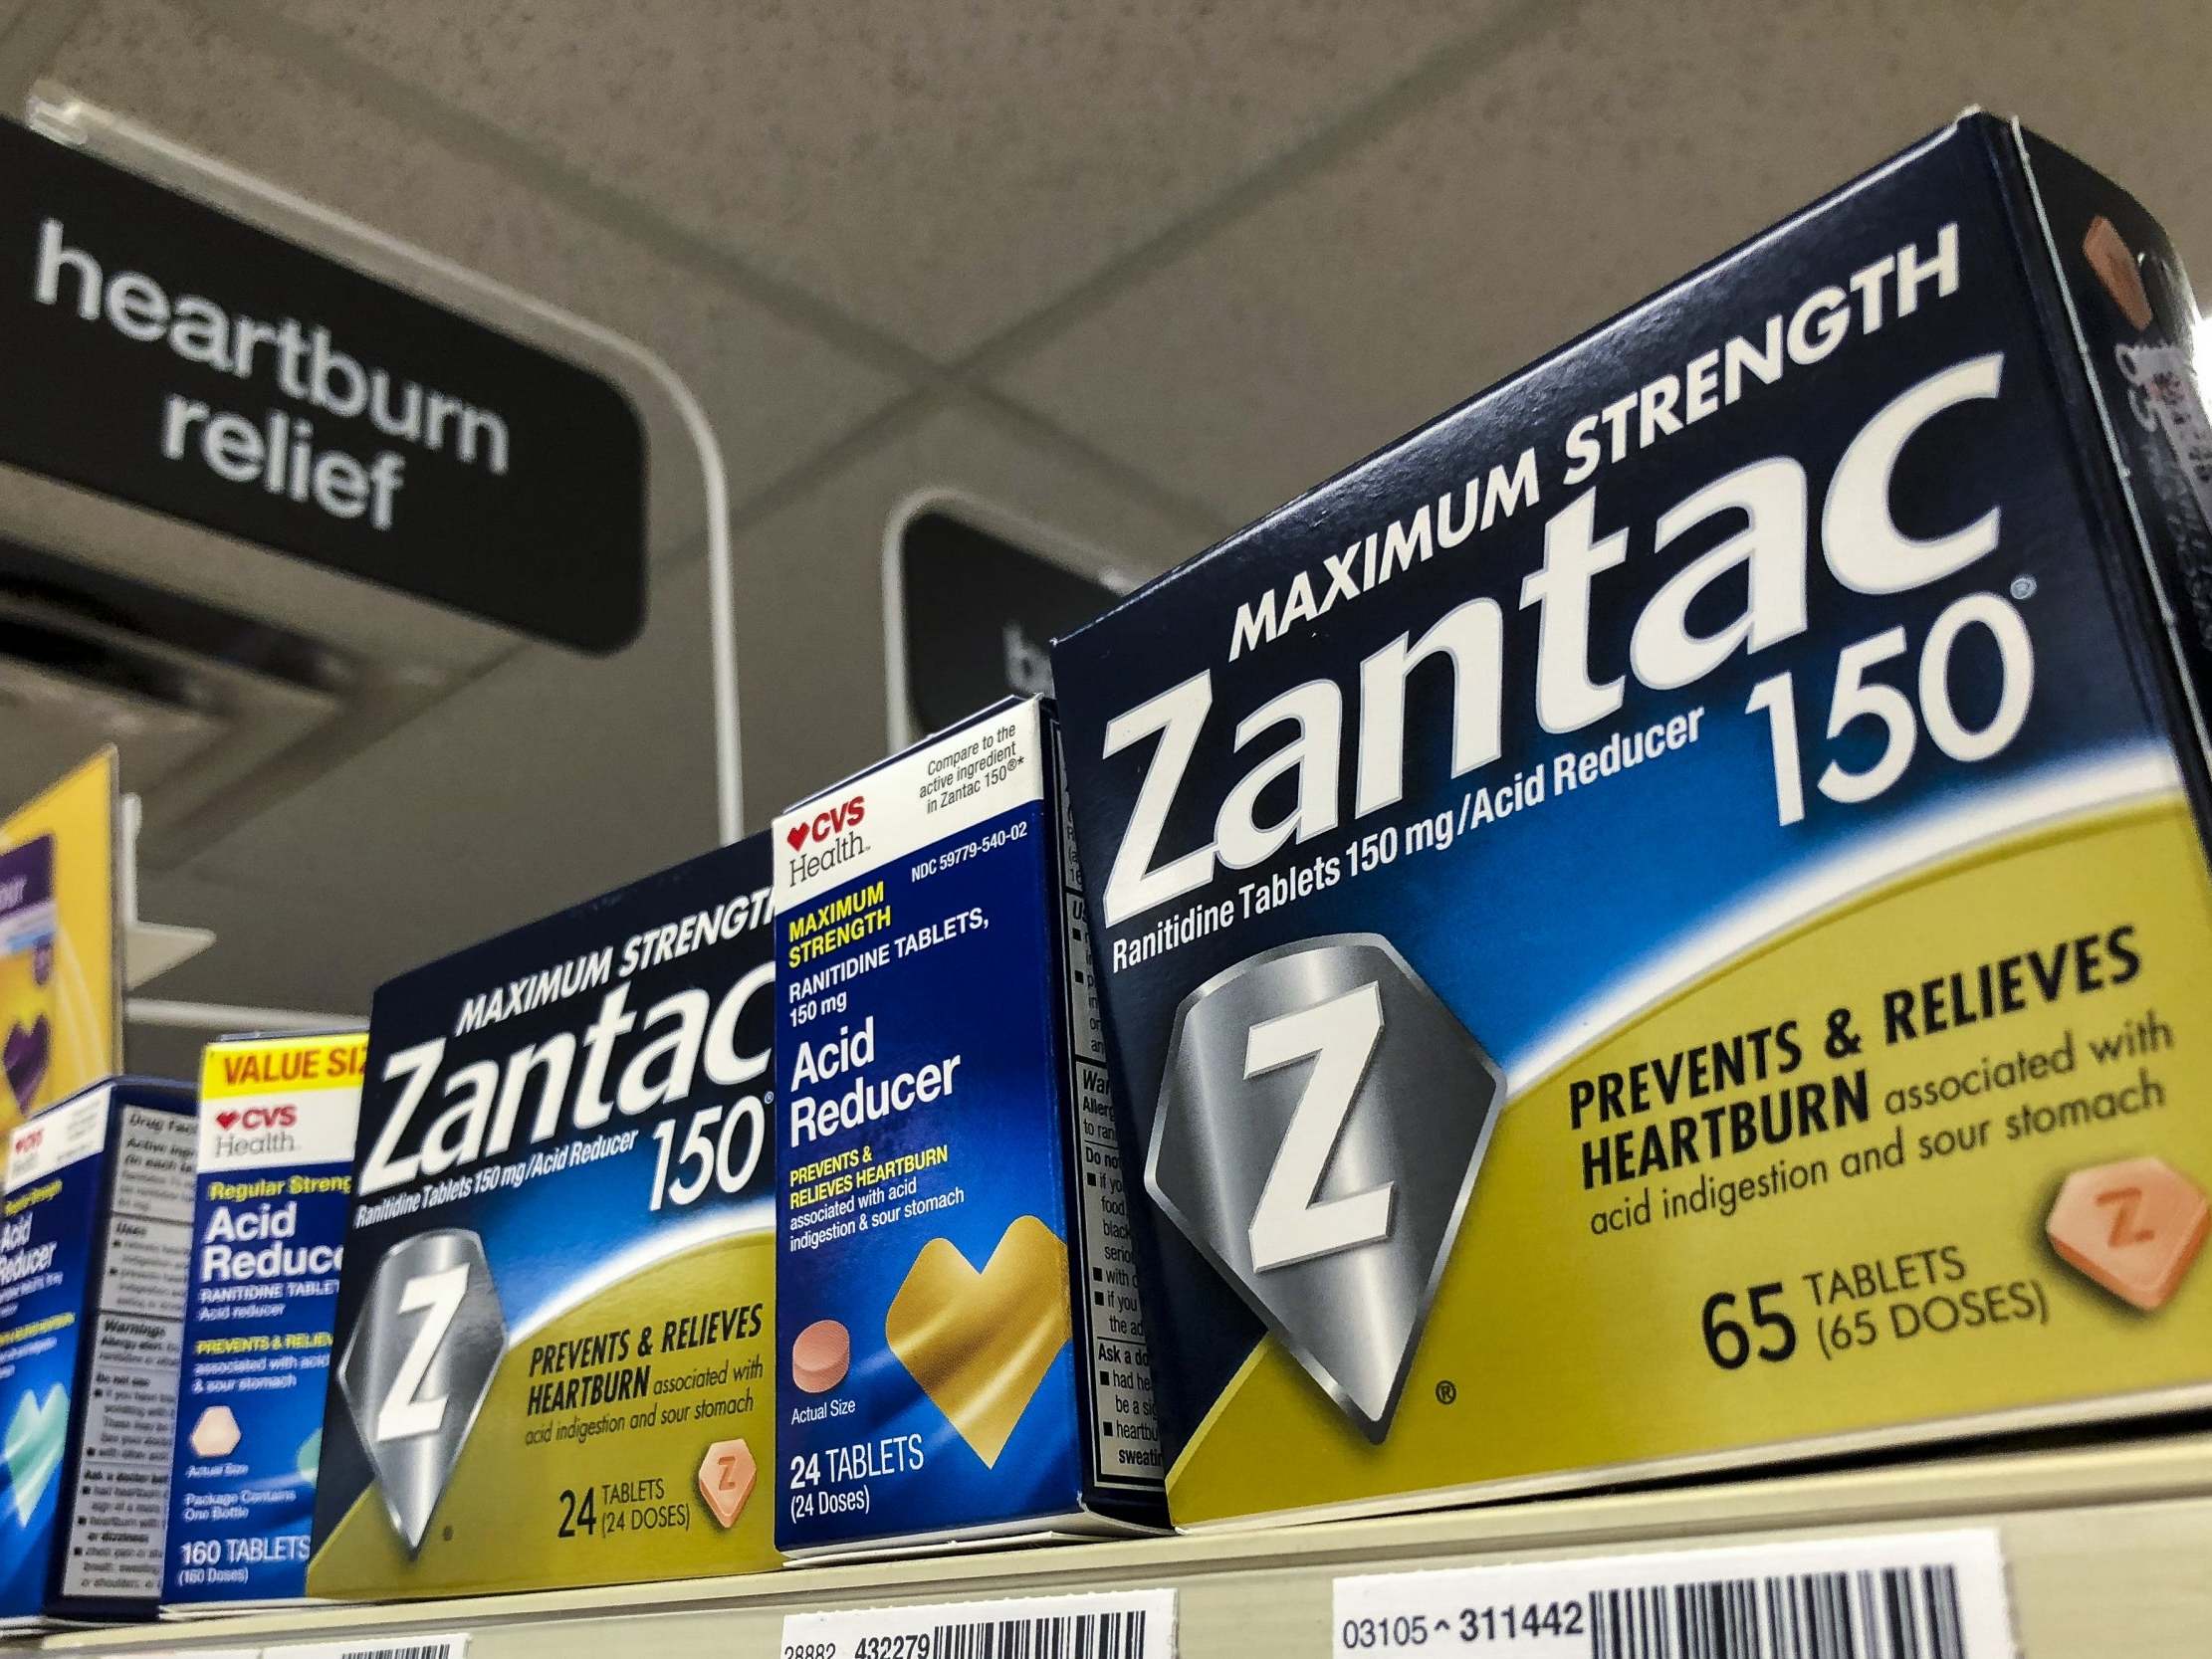 Zantac is taken for heartburn and indigestion 